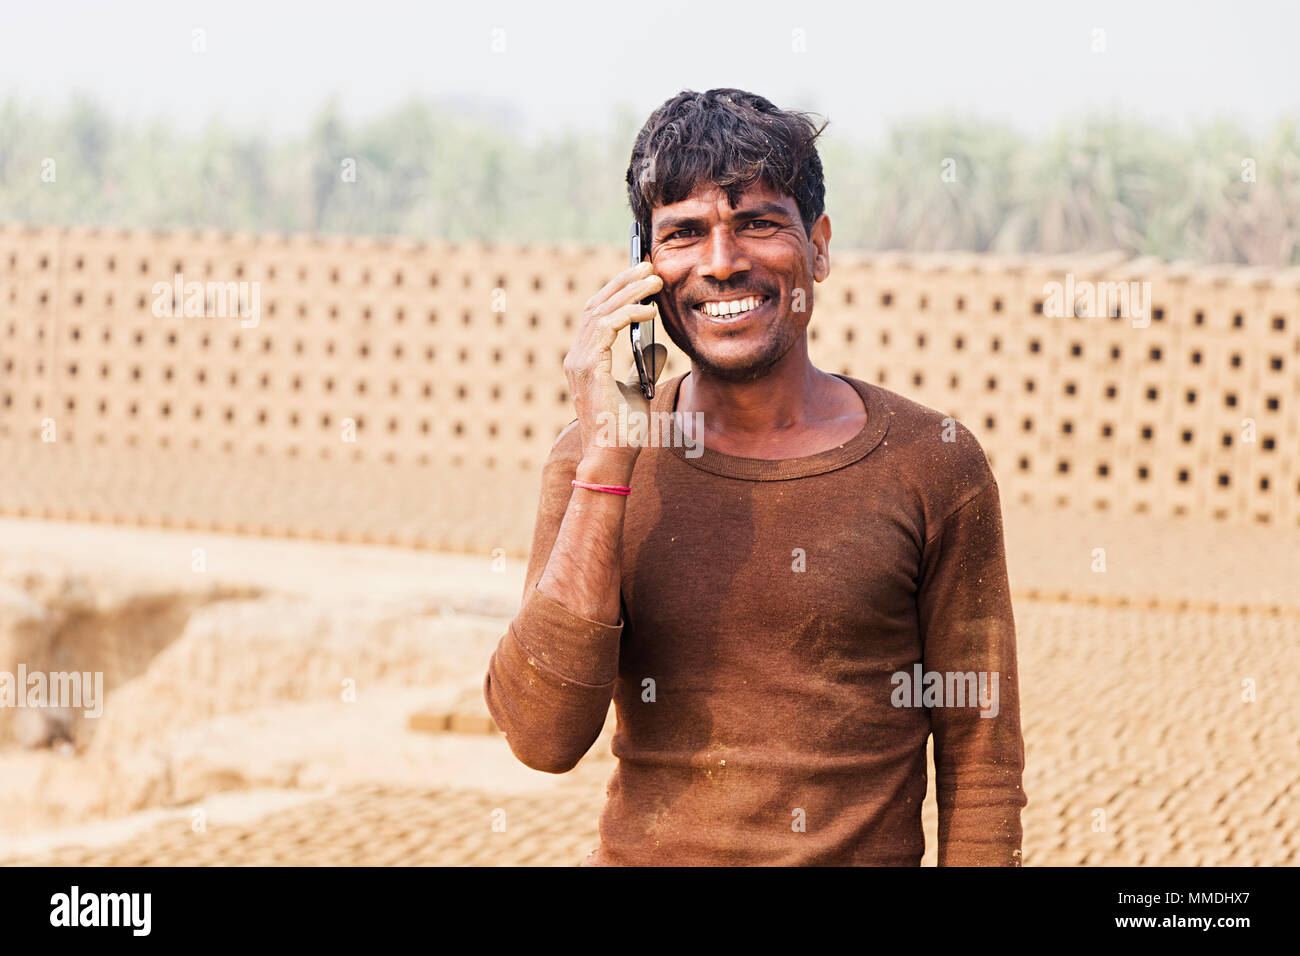 One Labour Male Talking On Cellphone Smiling In-Village Brick factory Stock Photo